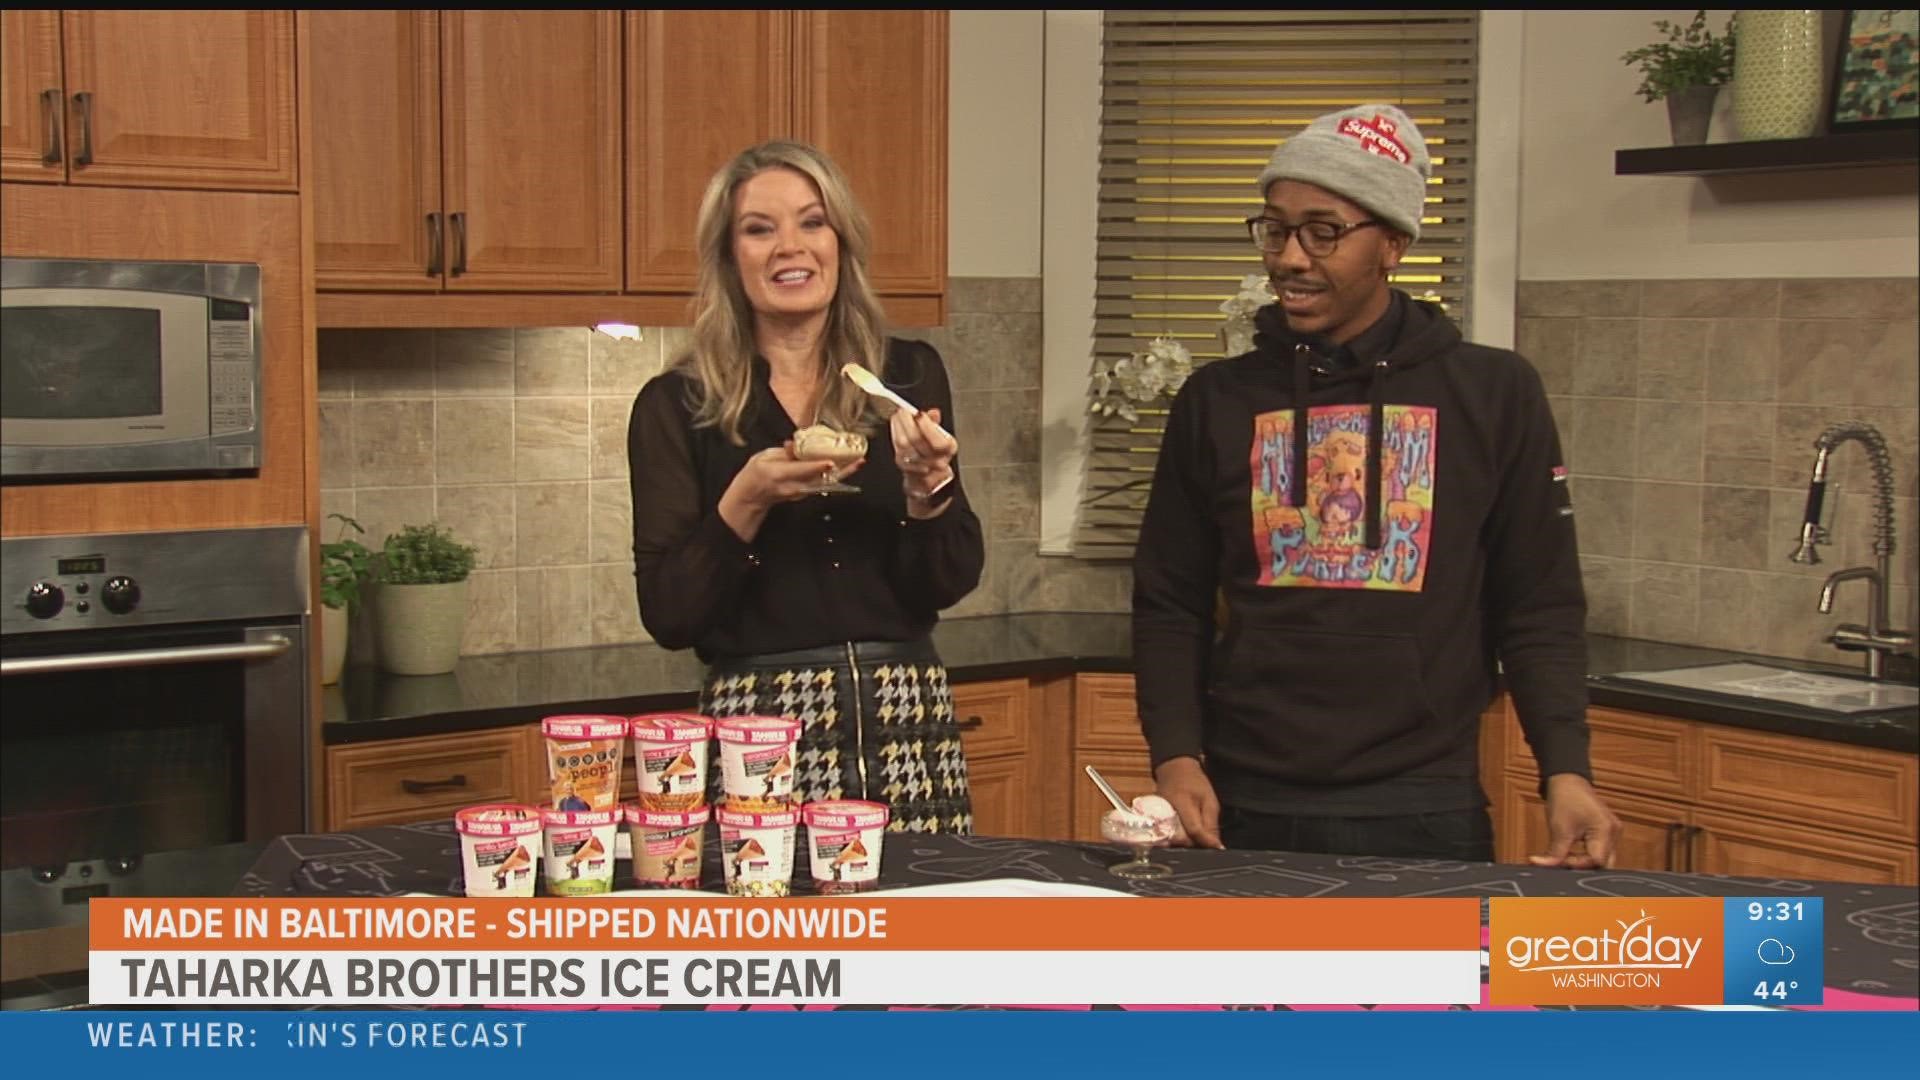 Detric McCoy, Owner of Taharka Brothers gives Kristen a taste test of the gourmet ice cream that's made and packaged in Maryland. On sale nationally at walmart.com.